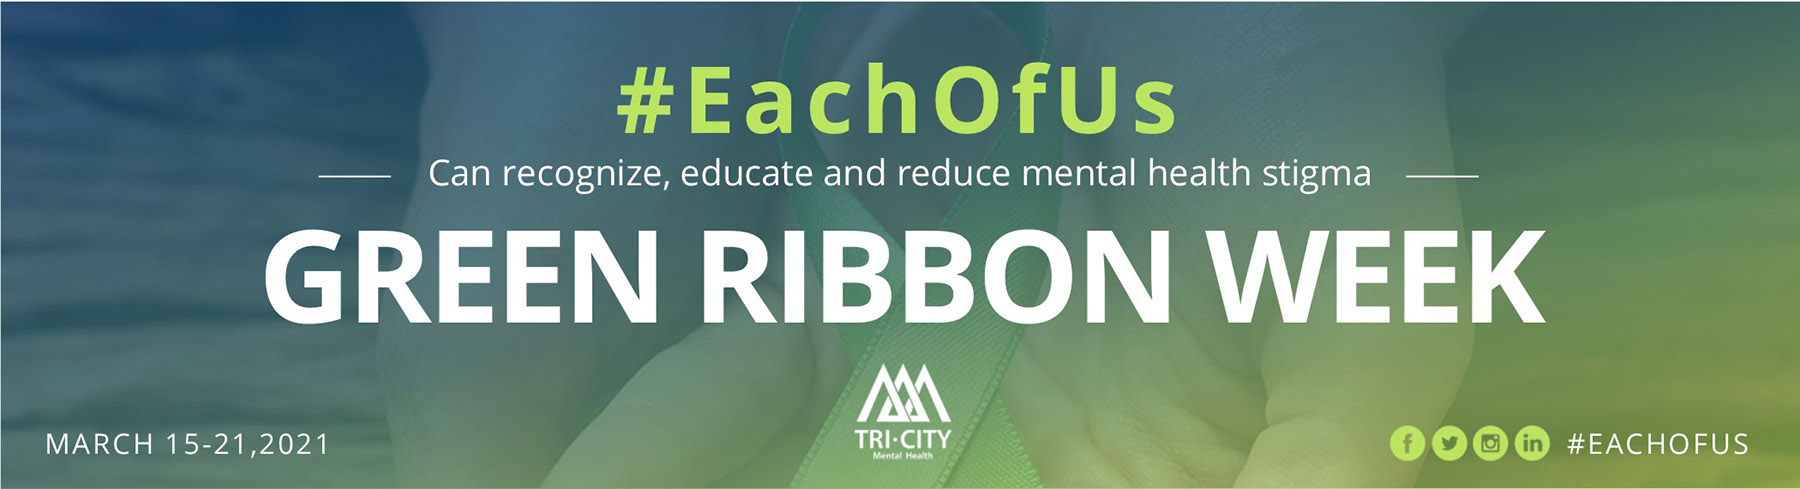 #Eachofus can recognize, educate and reduce mental health stigma. Green Ribbon Week March 15-21,2021. 